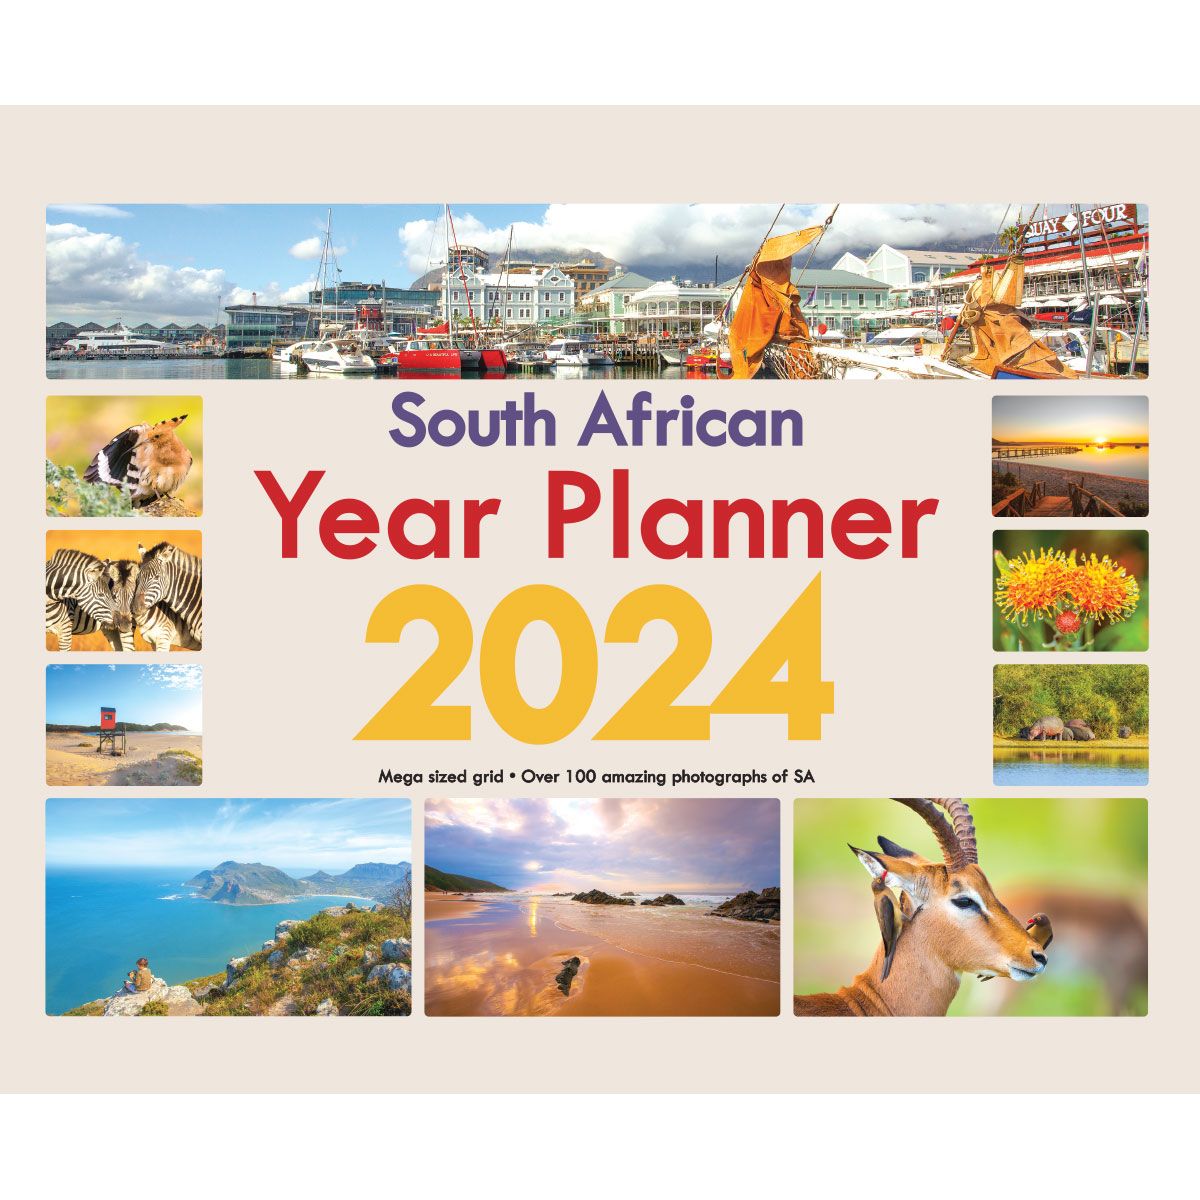 South African Year Planner A4 Wall Calendar 2024 Shop Today. Get it